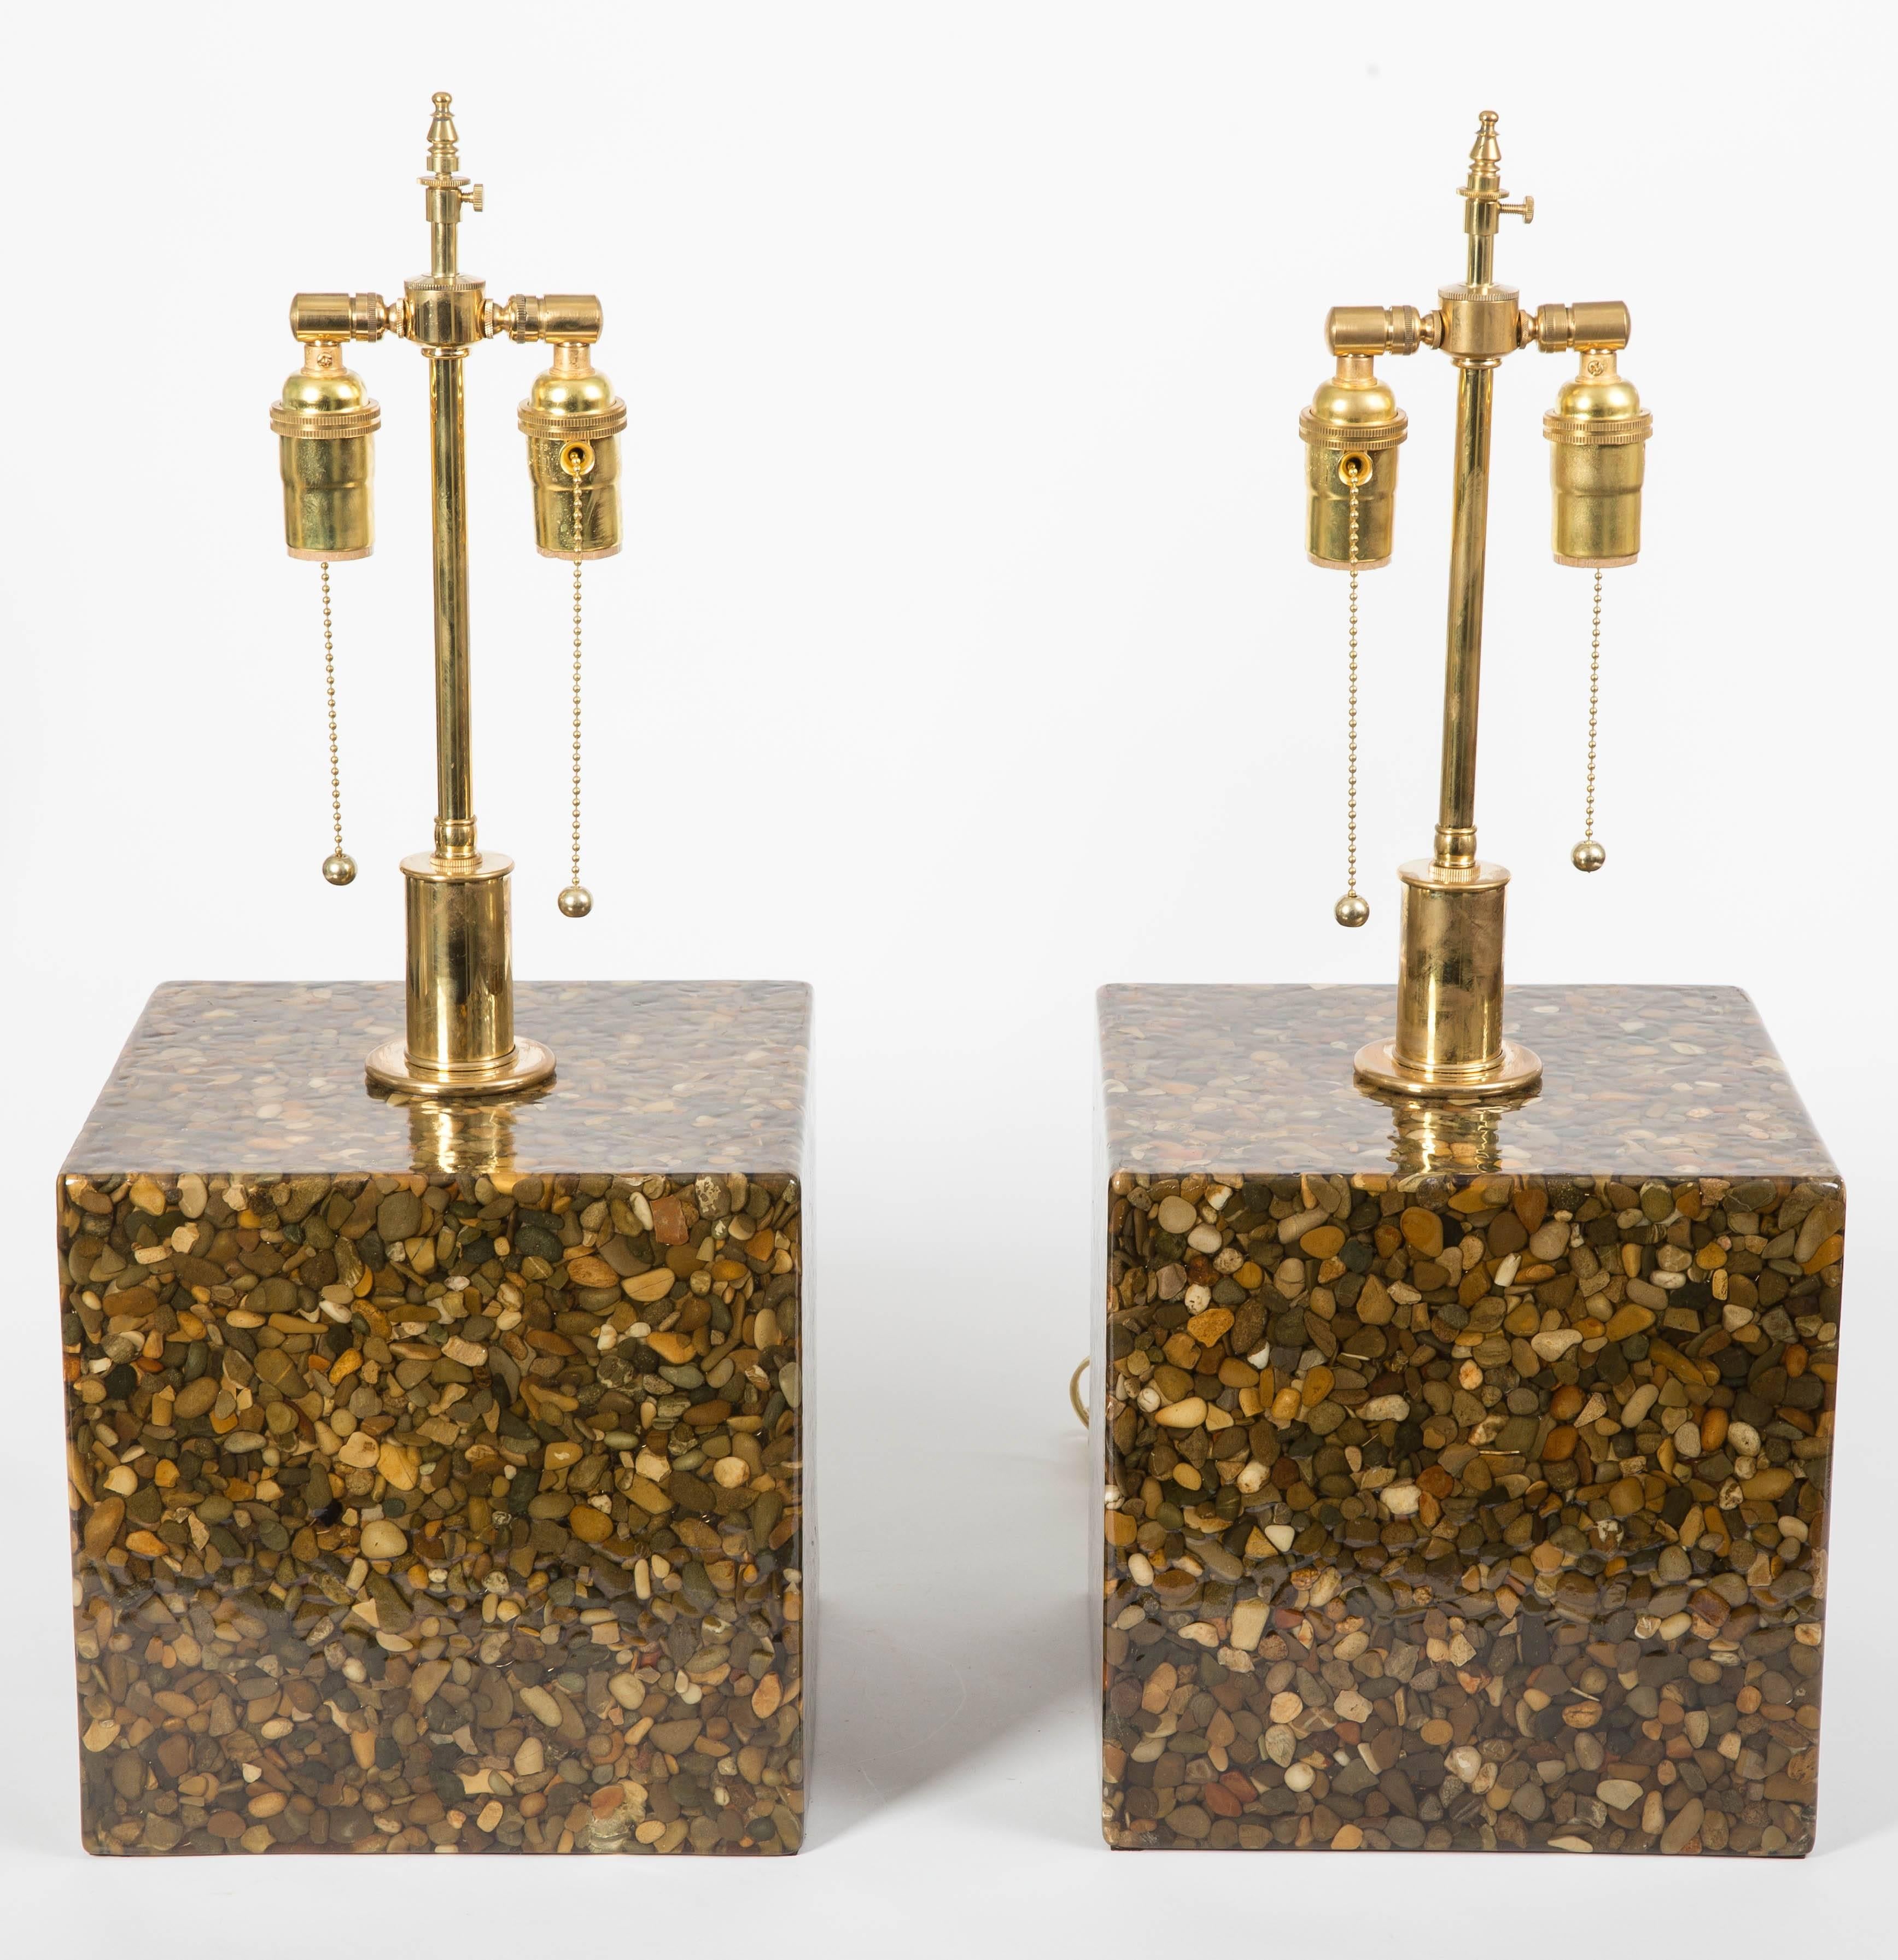 Pair of cubic resin and pebble lamps with brass hardware.